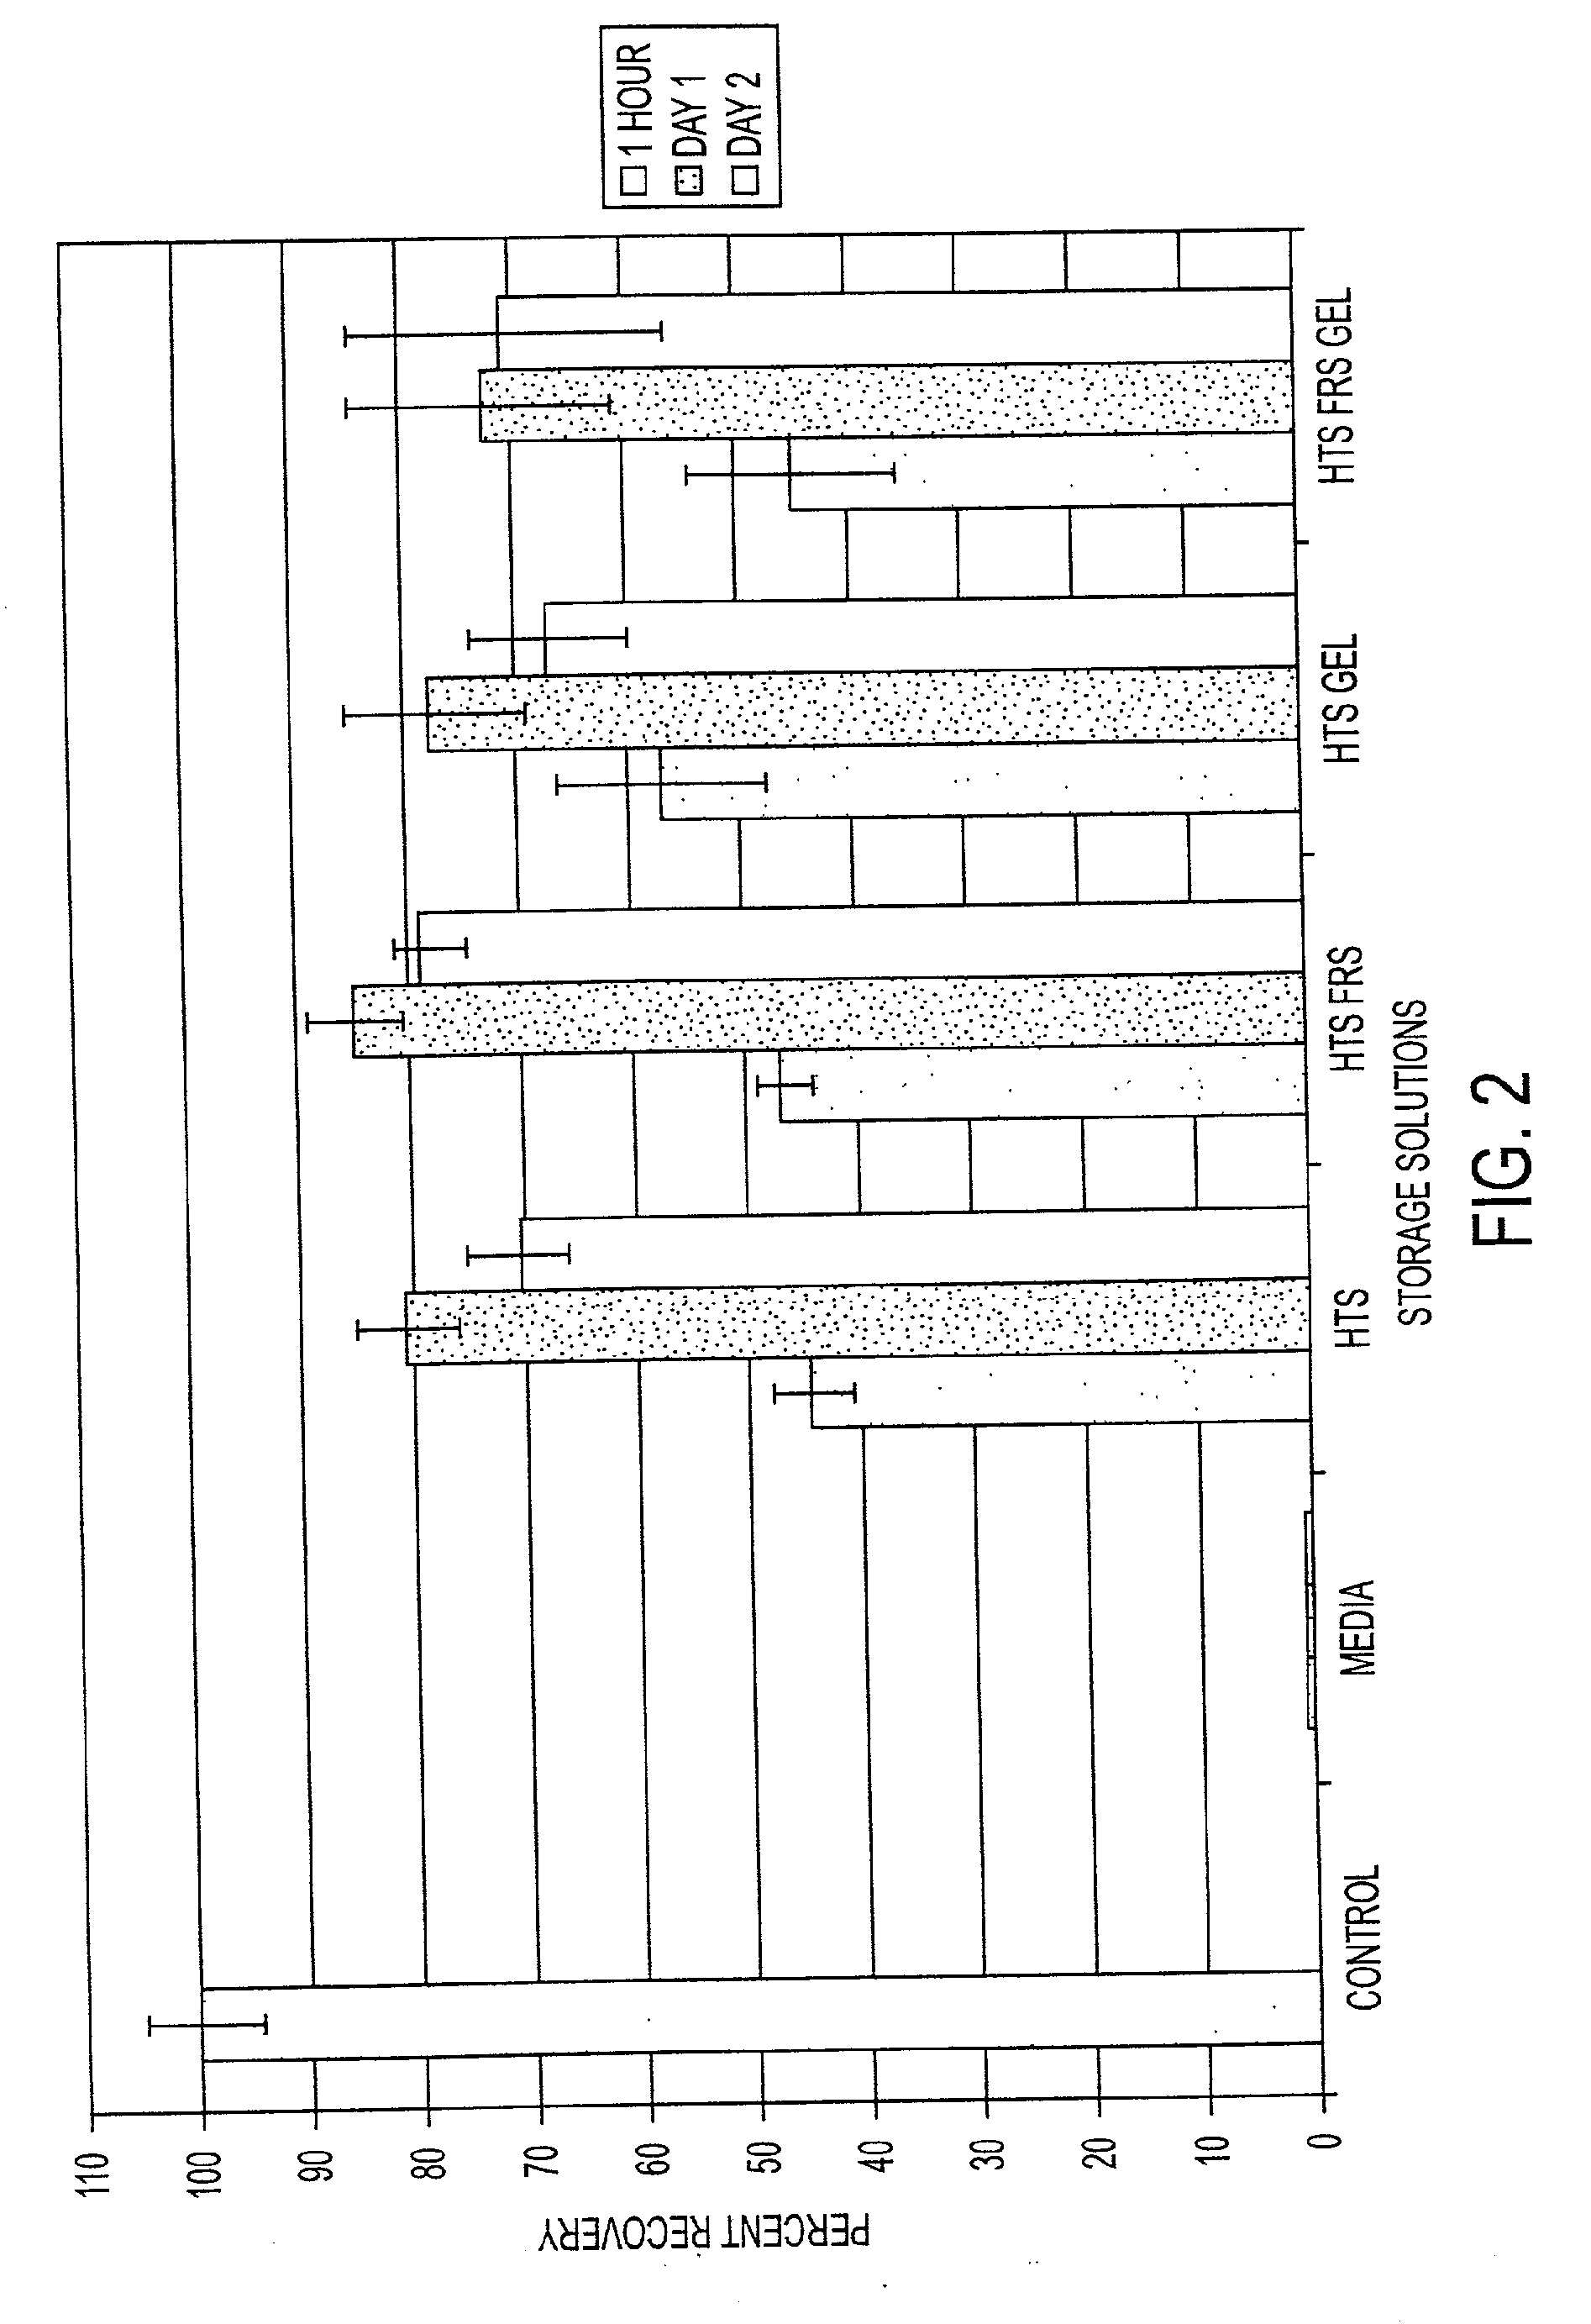 Methods and Compositions for the Control of Molecular-Based Cell Death During Preservation of Cells, Tissues or Organs in a Gel-Like State